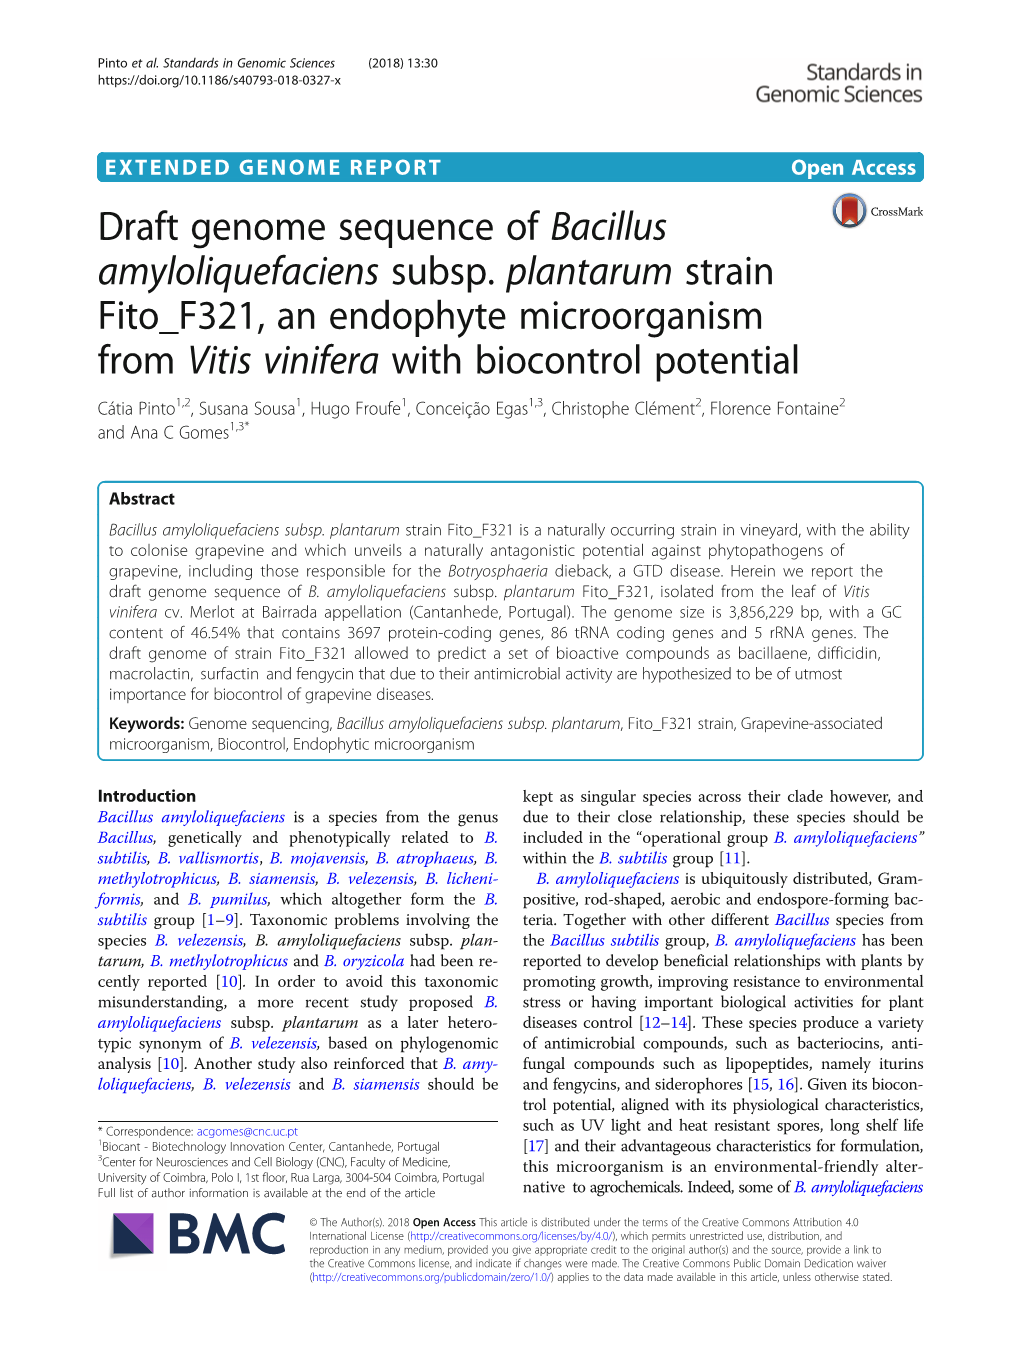 Draft Genome Sequence of Bacillus Amyloliquefaciens Subsp